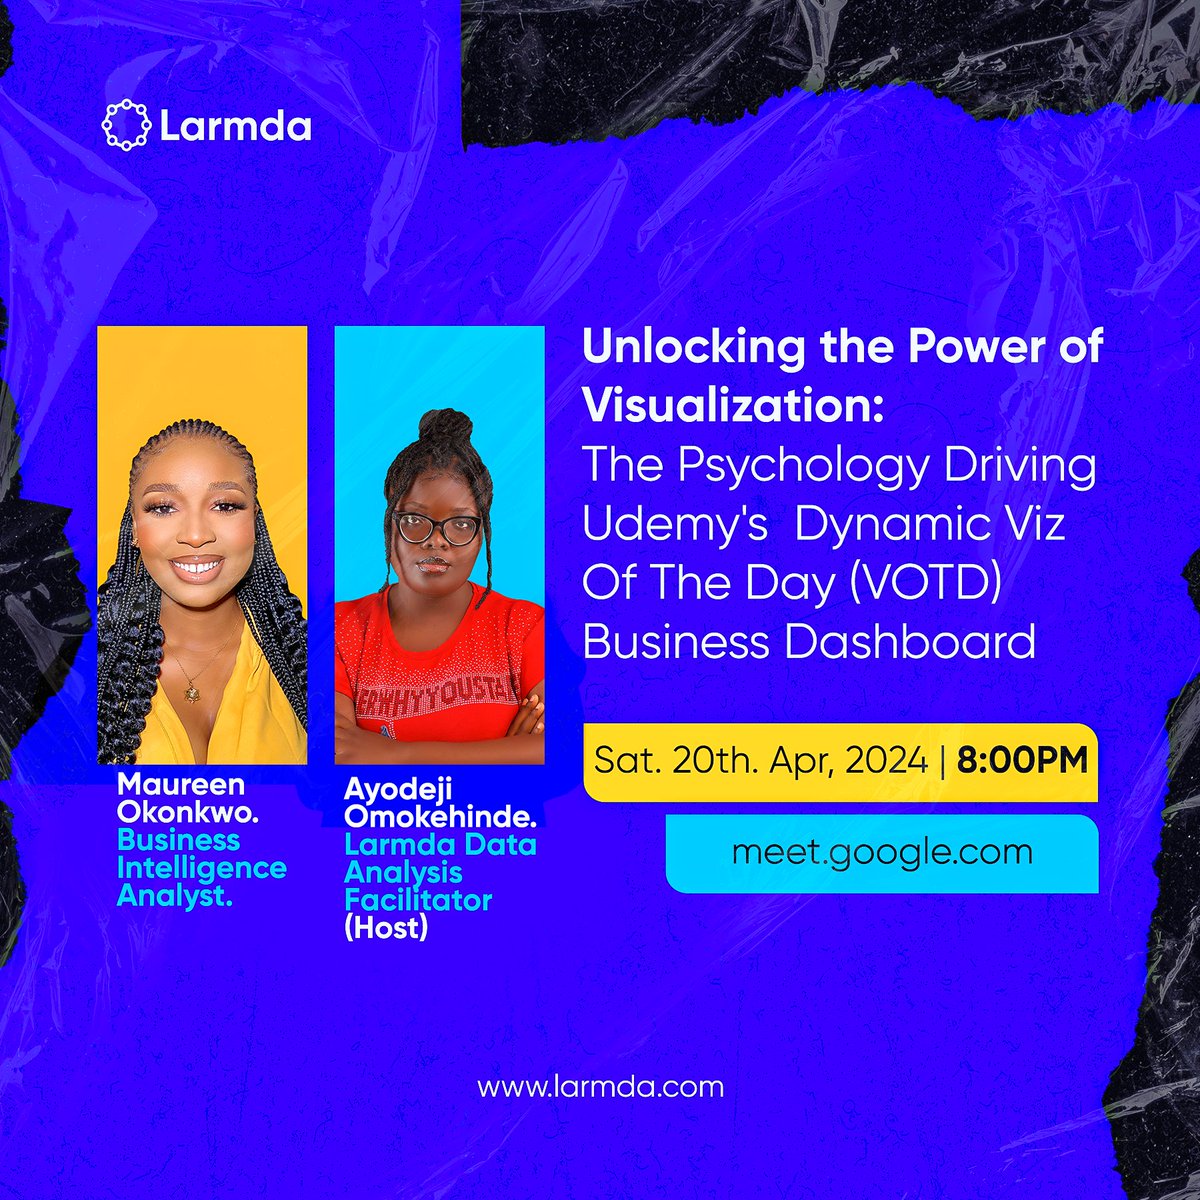 This Saturday by 8:00 PM WAT, @dat_tableau_gal will demstify the psychology behind her #VOTD Udemy Viz

If you're interested in joining the class, please fill out the form below

lnkd.in/djKduJP9

See you on the call!

#Tableau #dataviz #dataanalysis #datafam